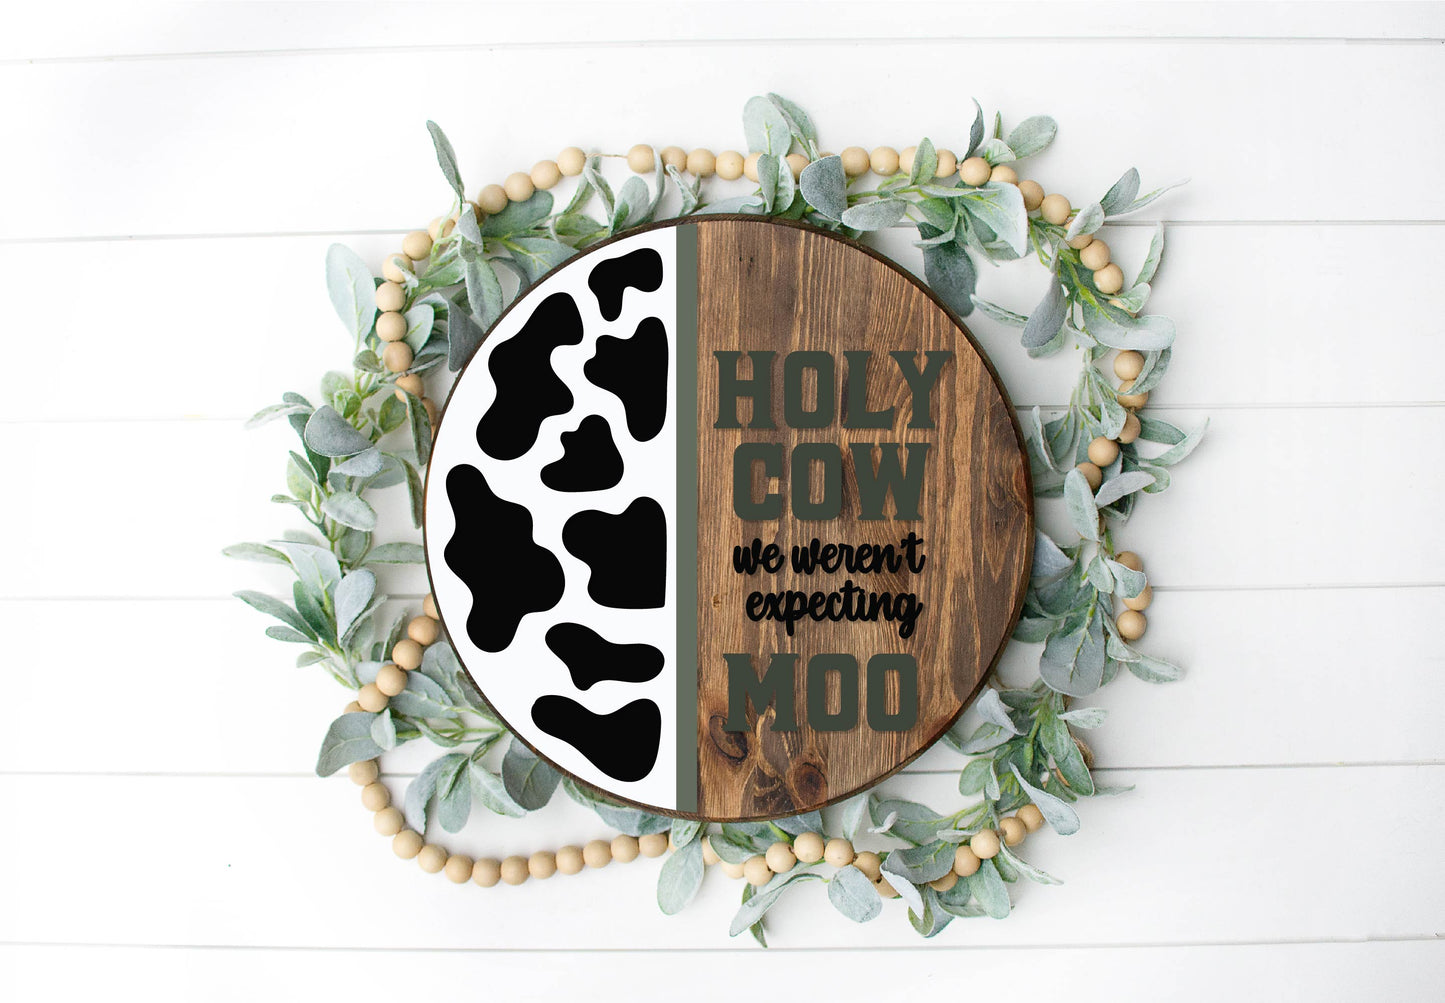 Holy cow sign